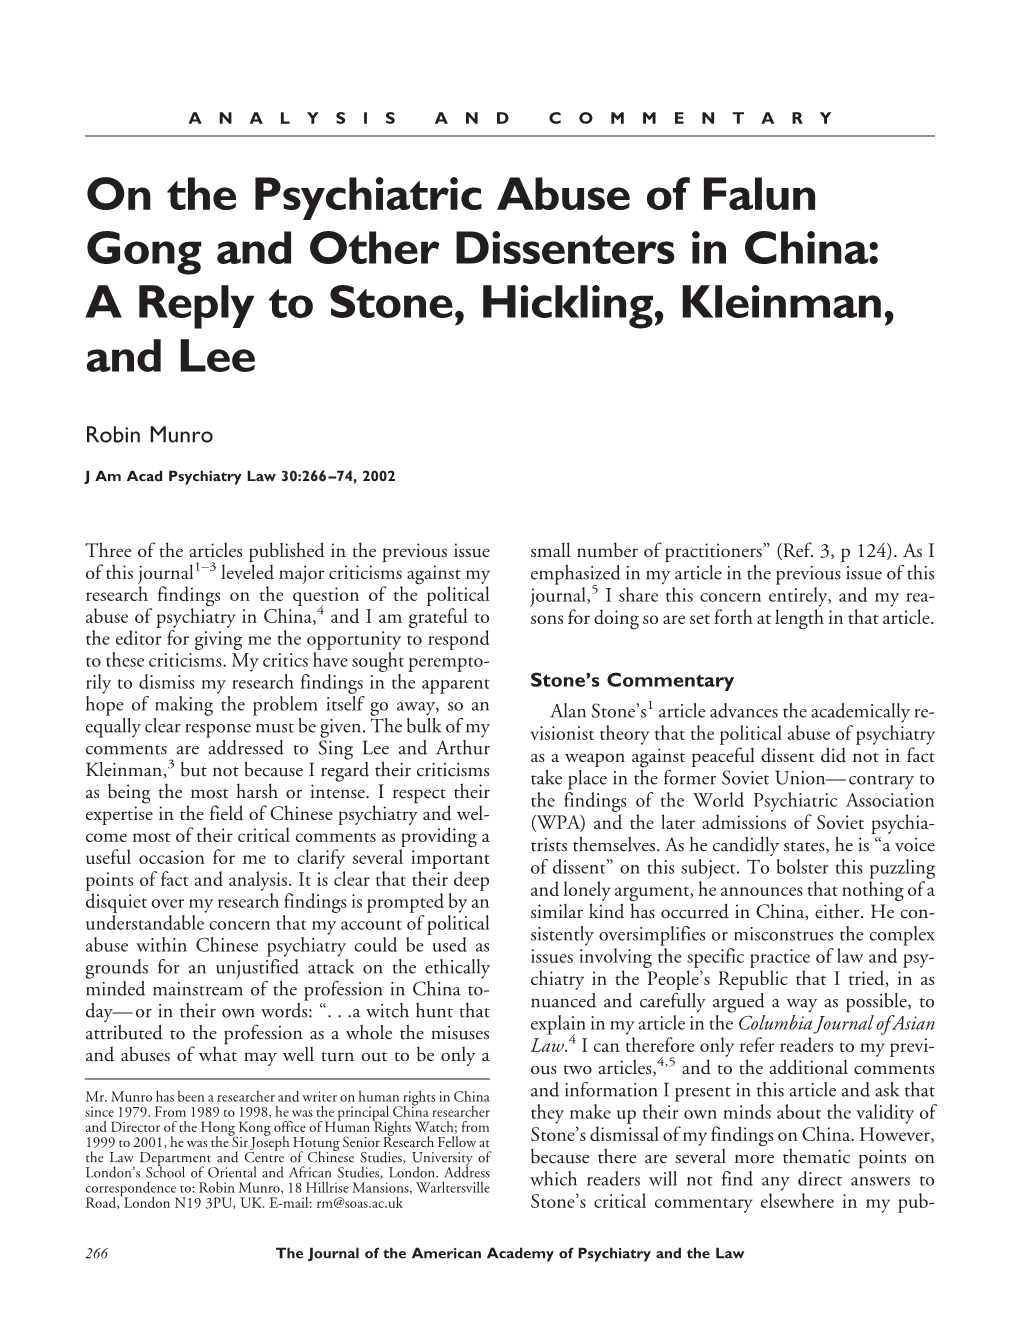 On the Psychiatric Abuse of Falun Gong and Other Dissenters in China: a Reply to Stone, Hickling, Kleinman, and Lee